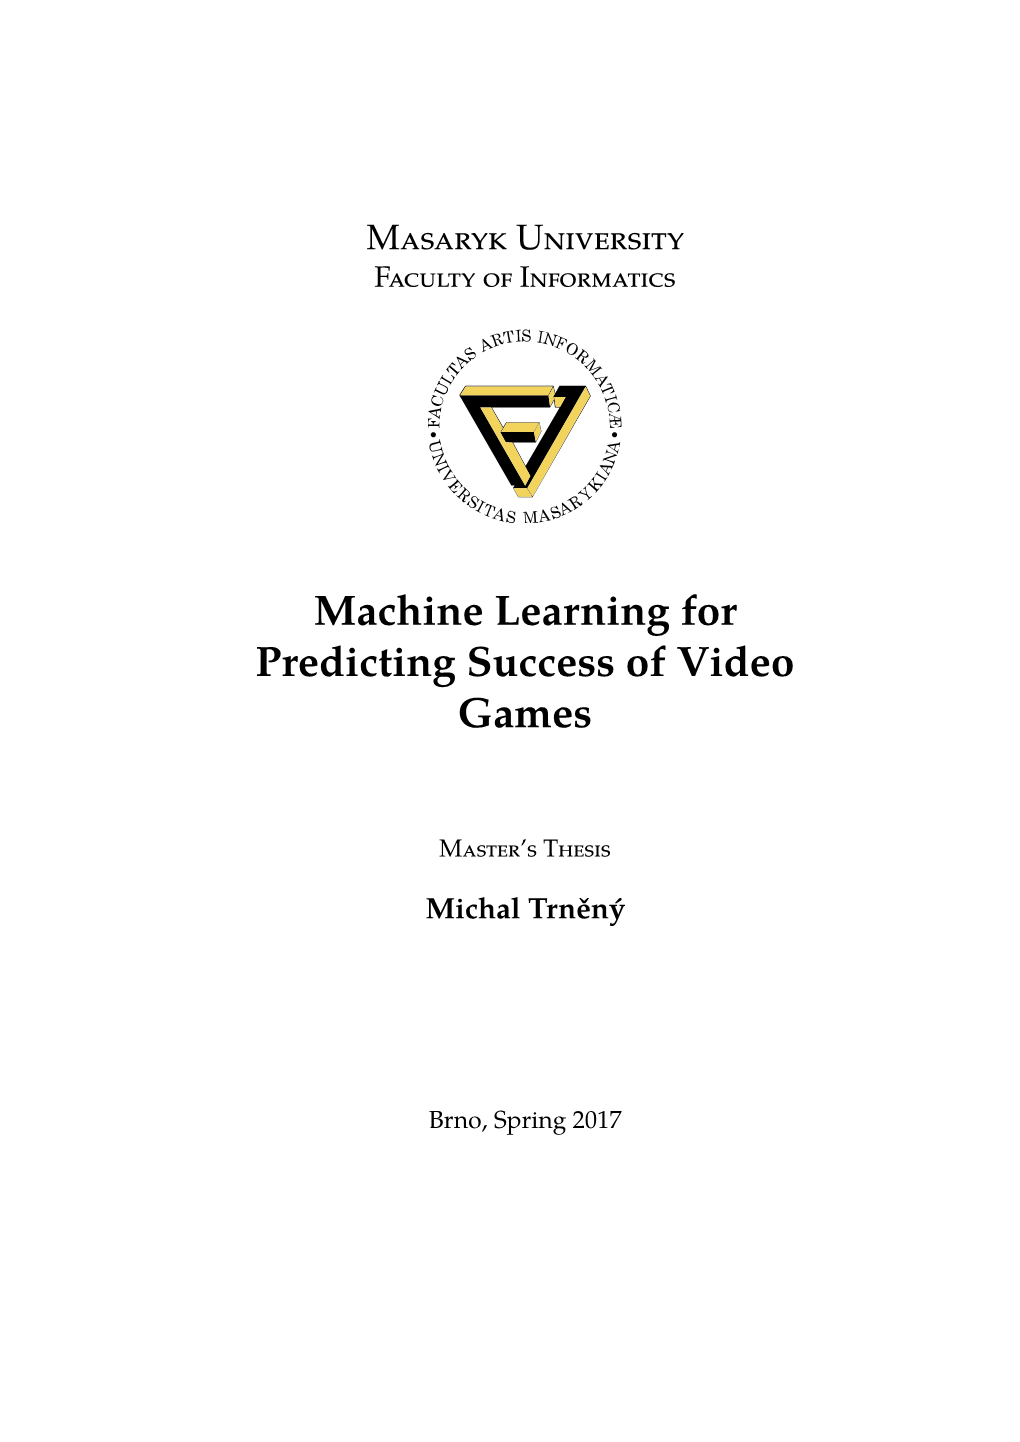 Machine Learning for Predicting Success of Video Games